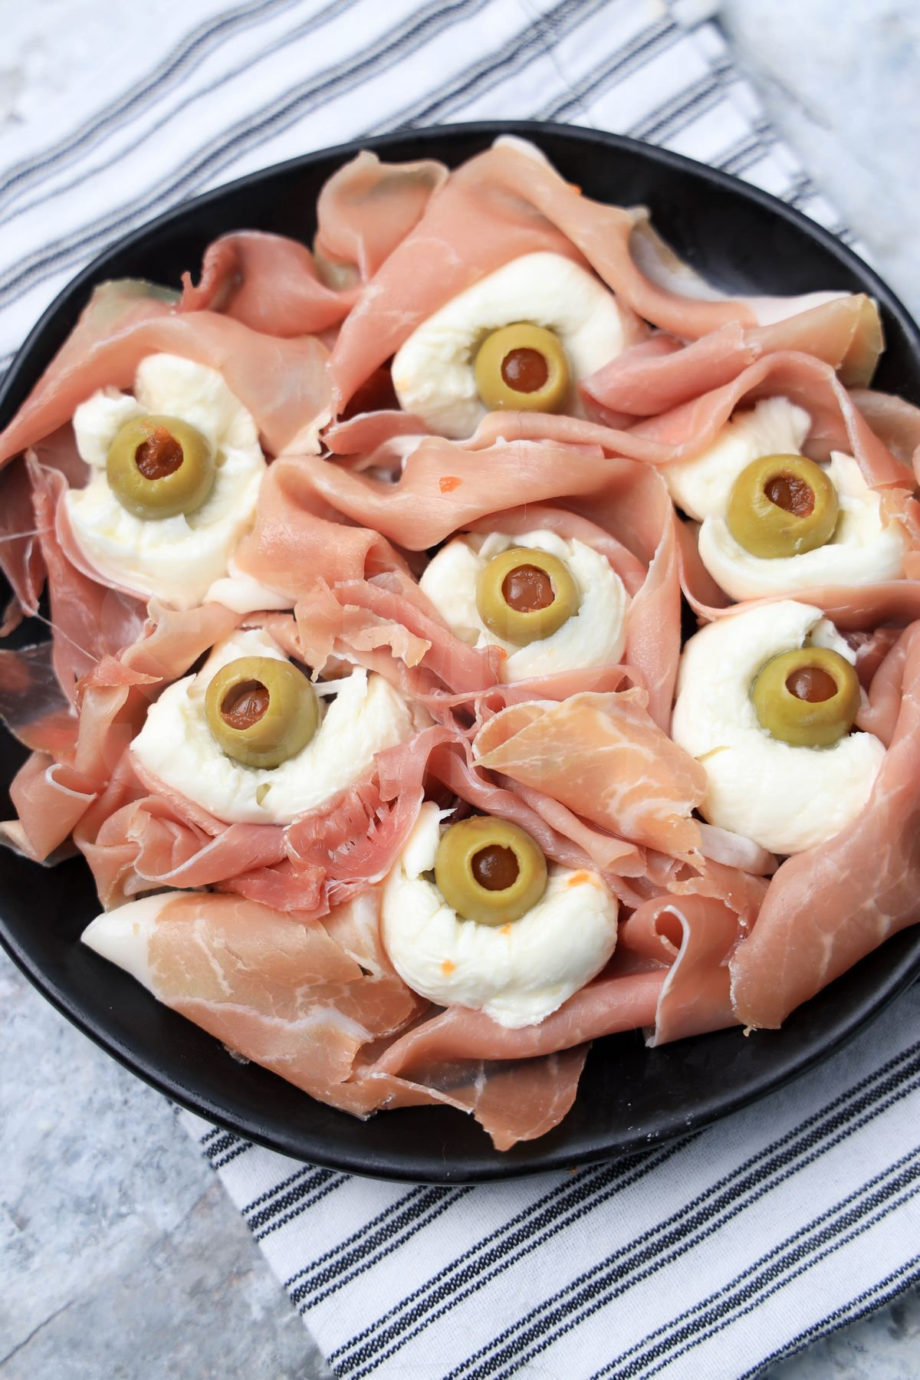 The Prosciutto Eyeballs comes on a black plate with a white striped napkin on a marble backdrop.